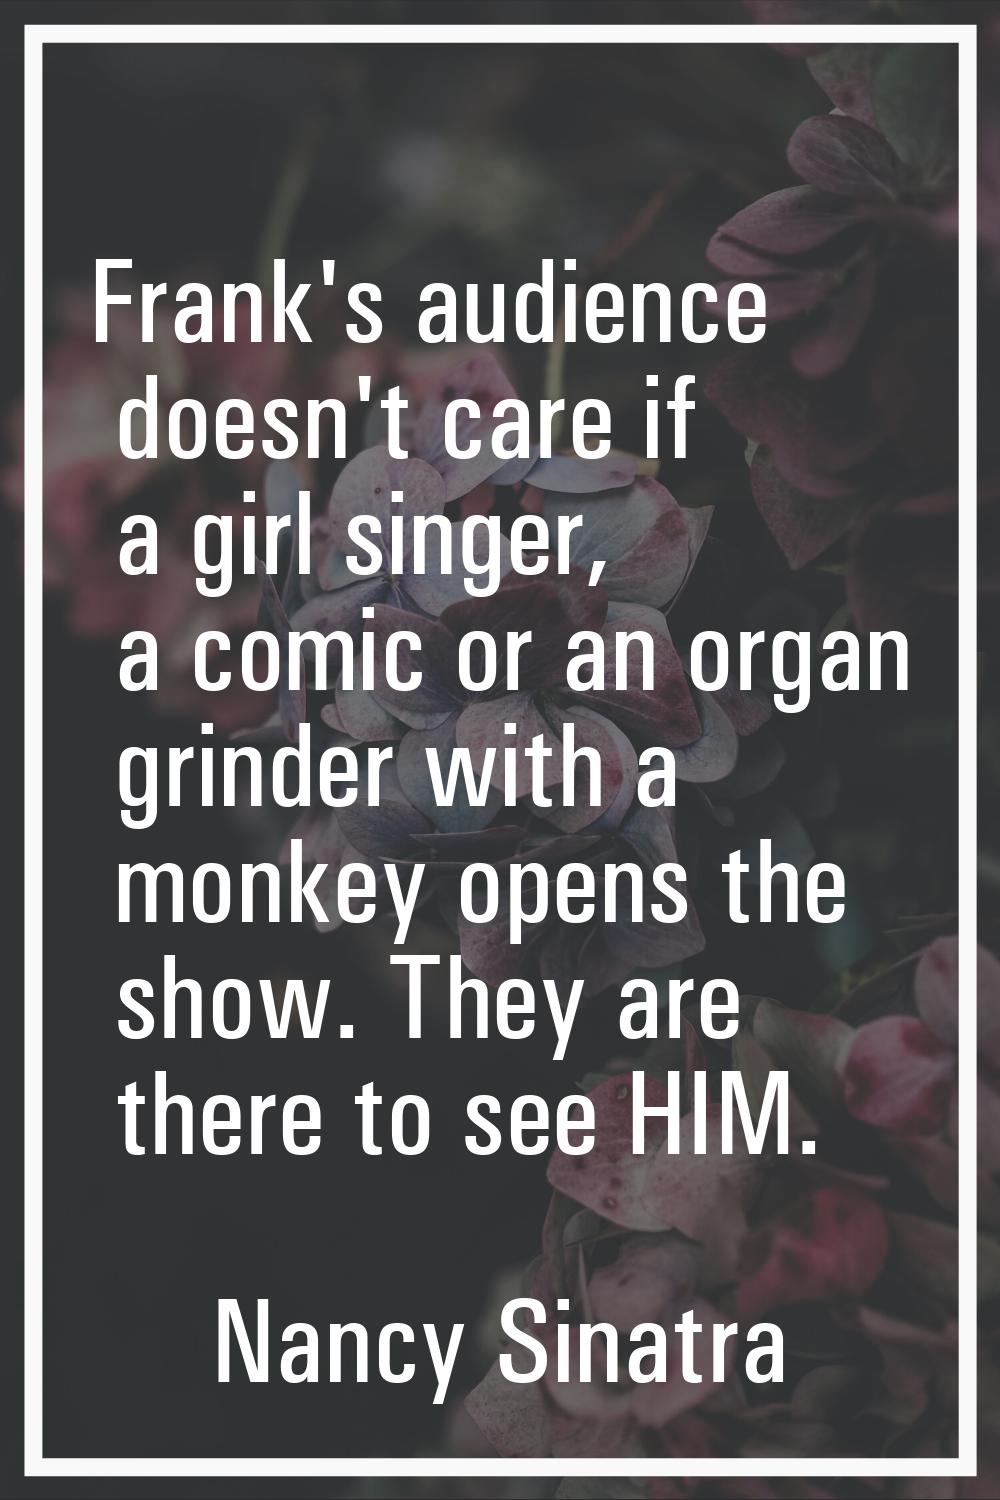 Frank's audience doesn't care if a girl singer, a comic or an organ grinder with a monkey opens the